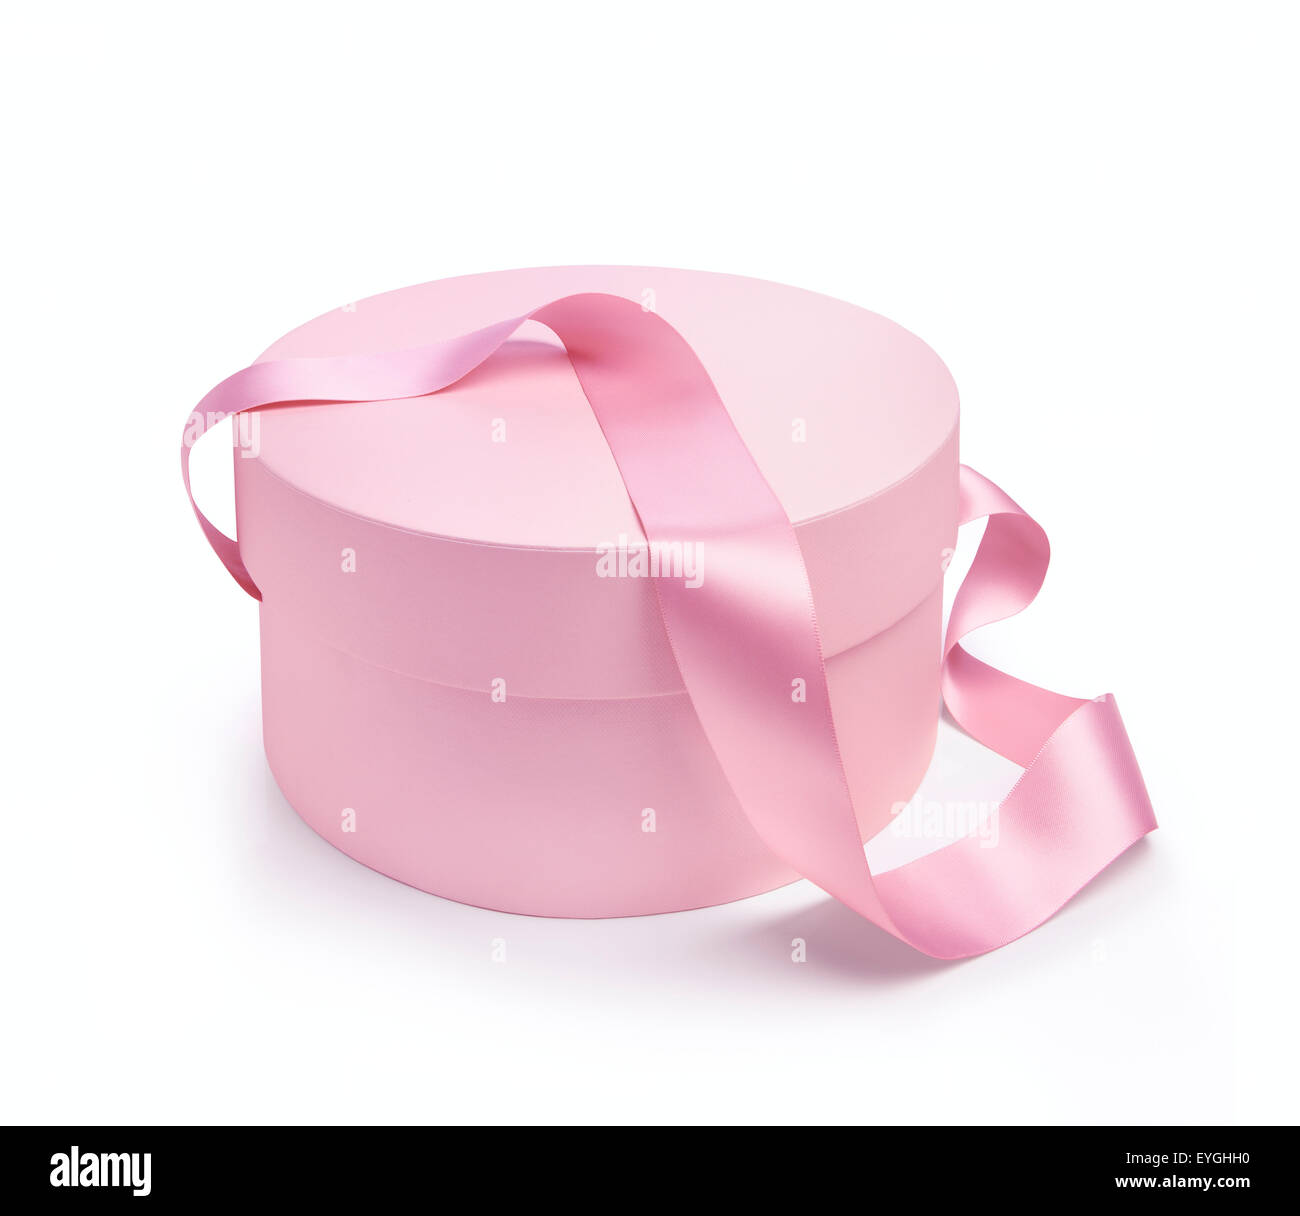 Gift round shape box in pink color with handle tape. Isolated on white background Stock Photo